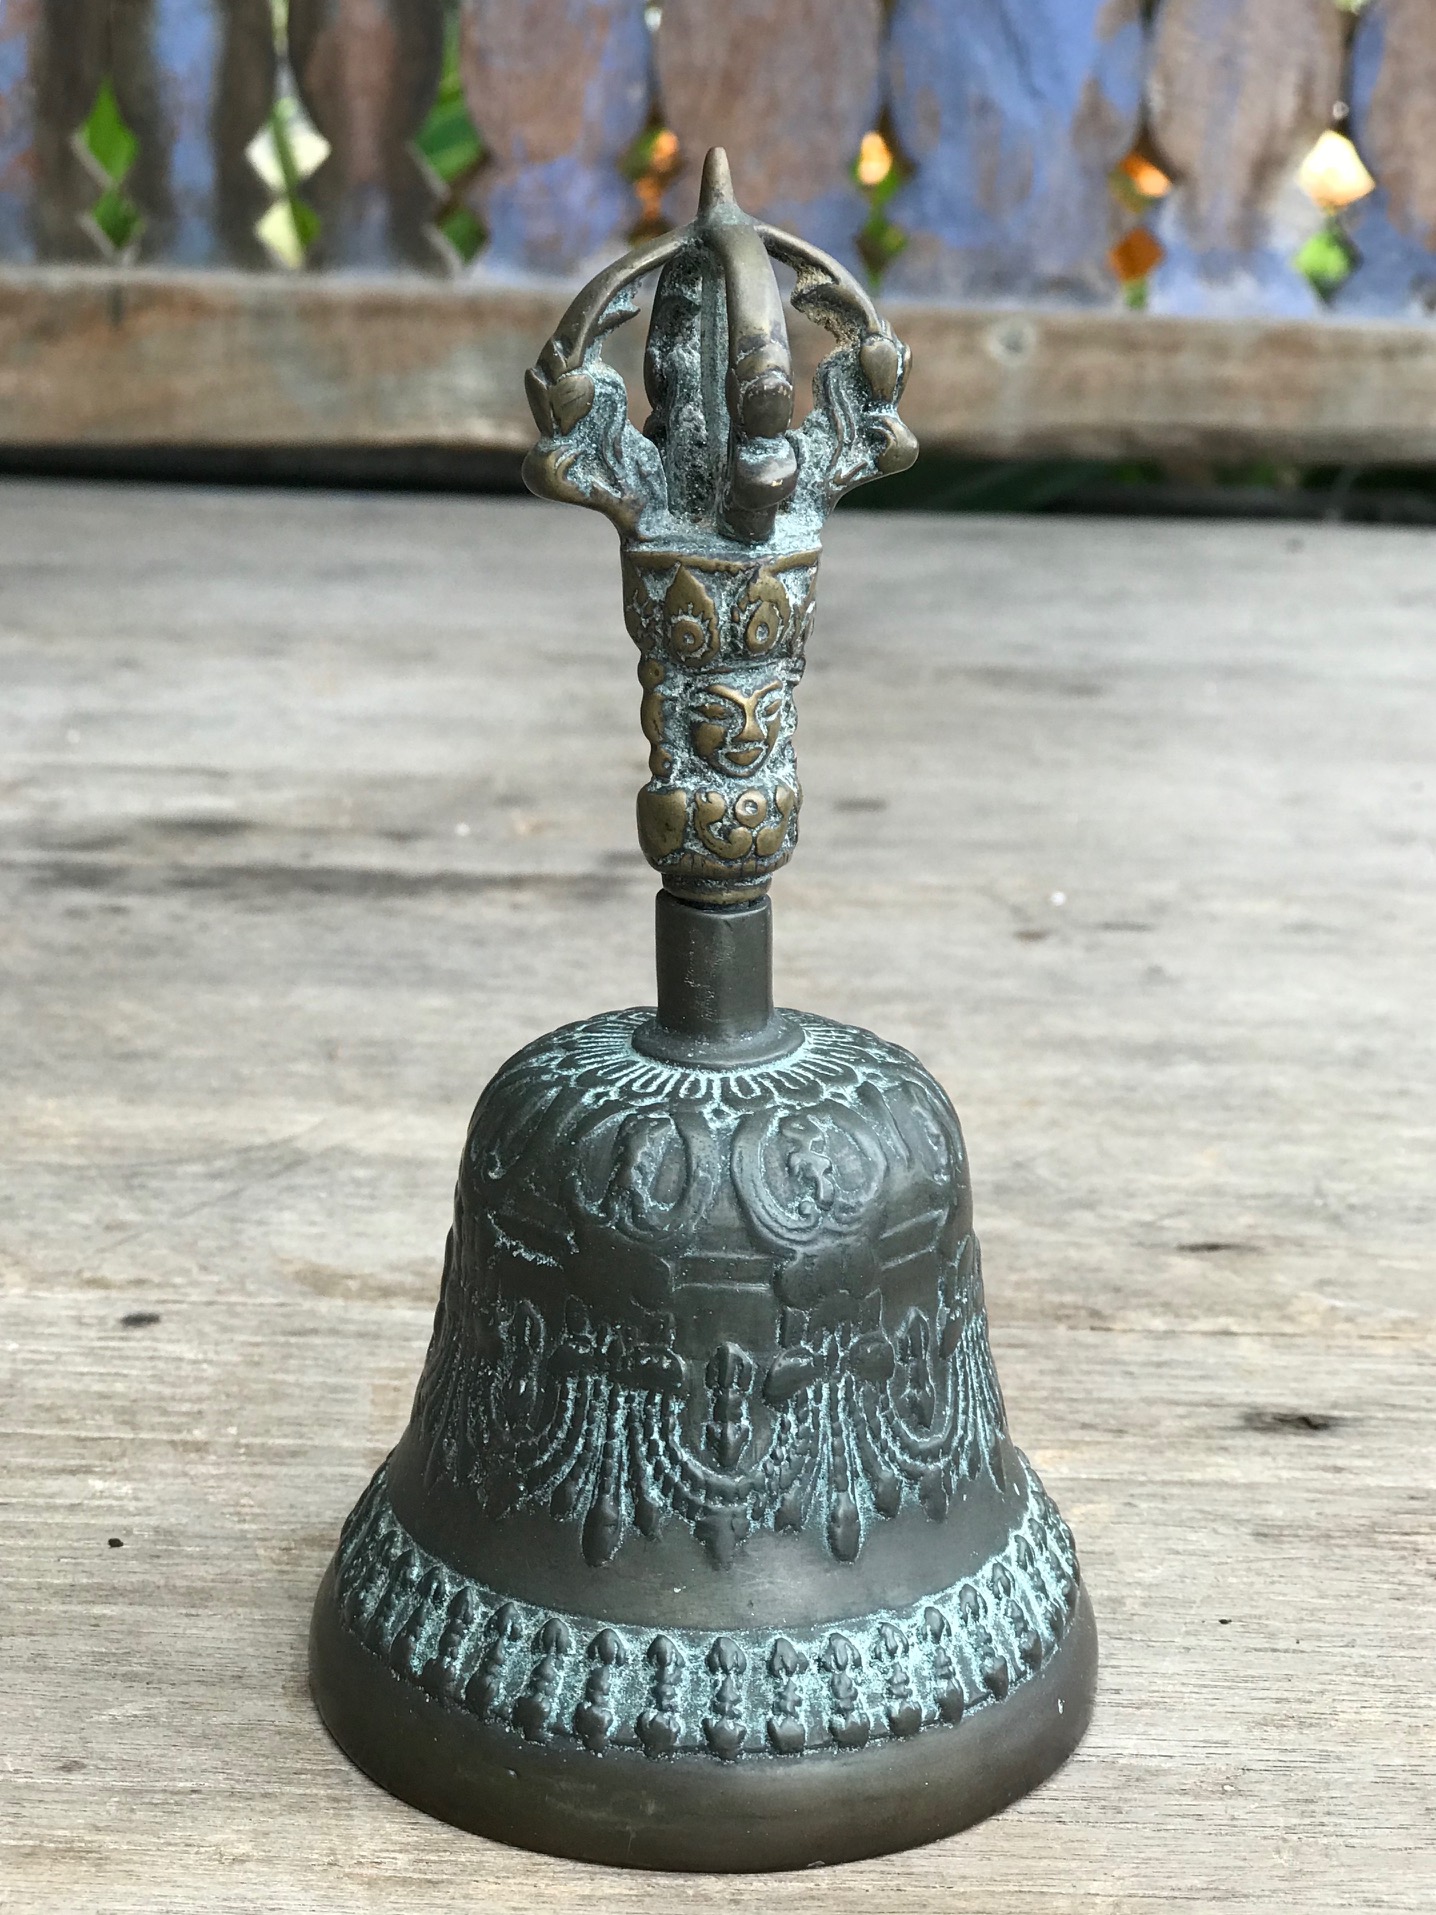 Musical Instrument, temple clapper bell with face, Nepal, 150 years old, bronze, The Bell, representing the female aspect, stands for wisdom. It is held in the left hand. If the Dorje (crown motif on top) is separate, it is held in the right hand. The are always used in combination in religious ceremonies. Together they represent enlightenment. 6 1/2" x 3 1/4", $900. thedavidalancollection.com , solana beach, ca